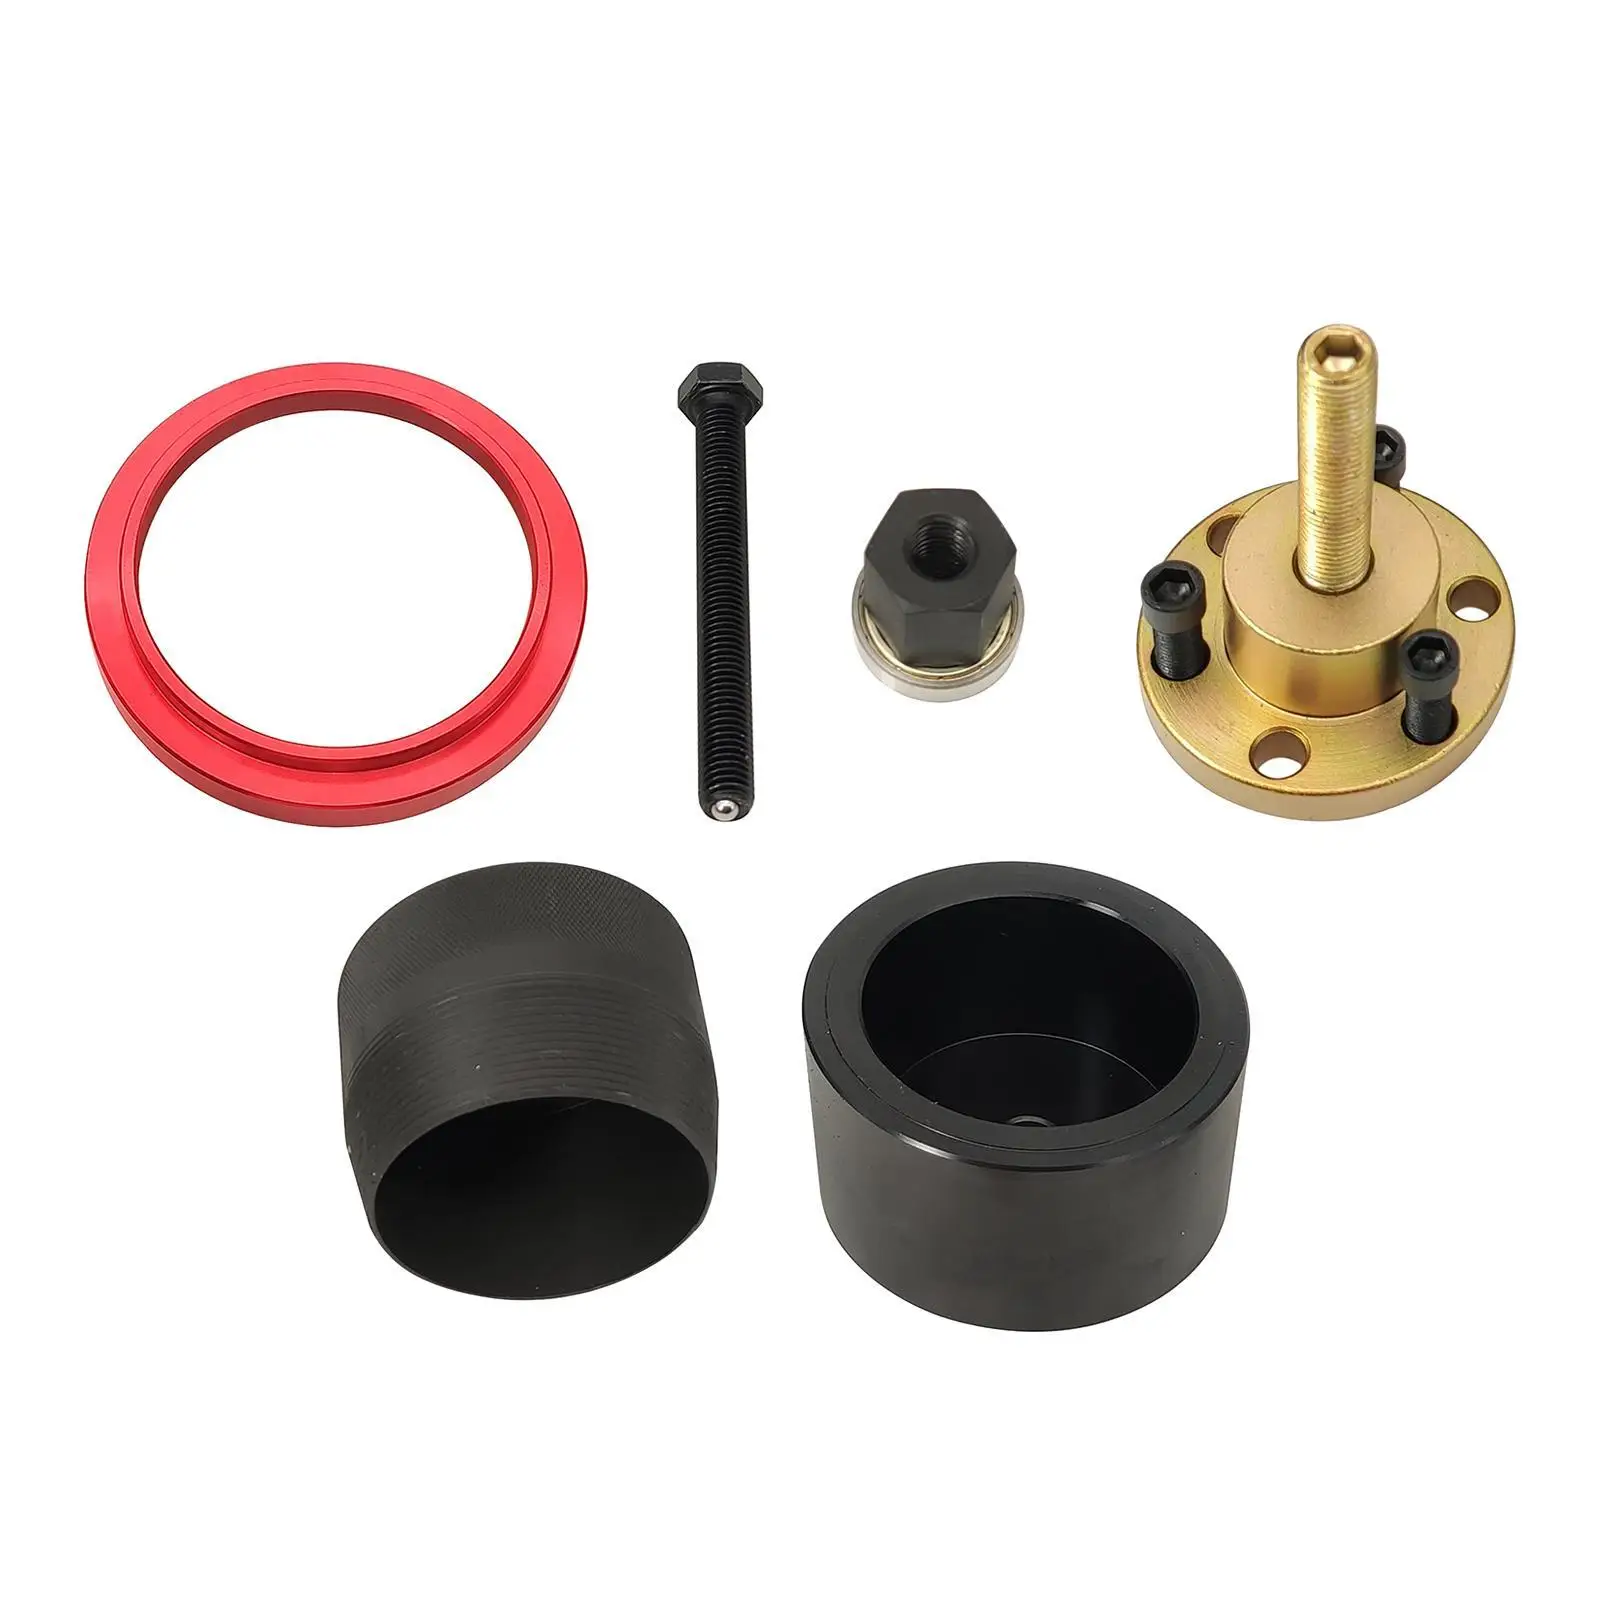 Car Oil Seal Remover and Installer Fit for N20 N26 Engines